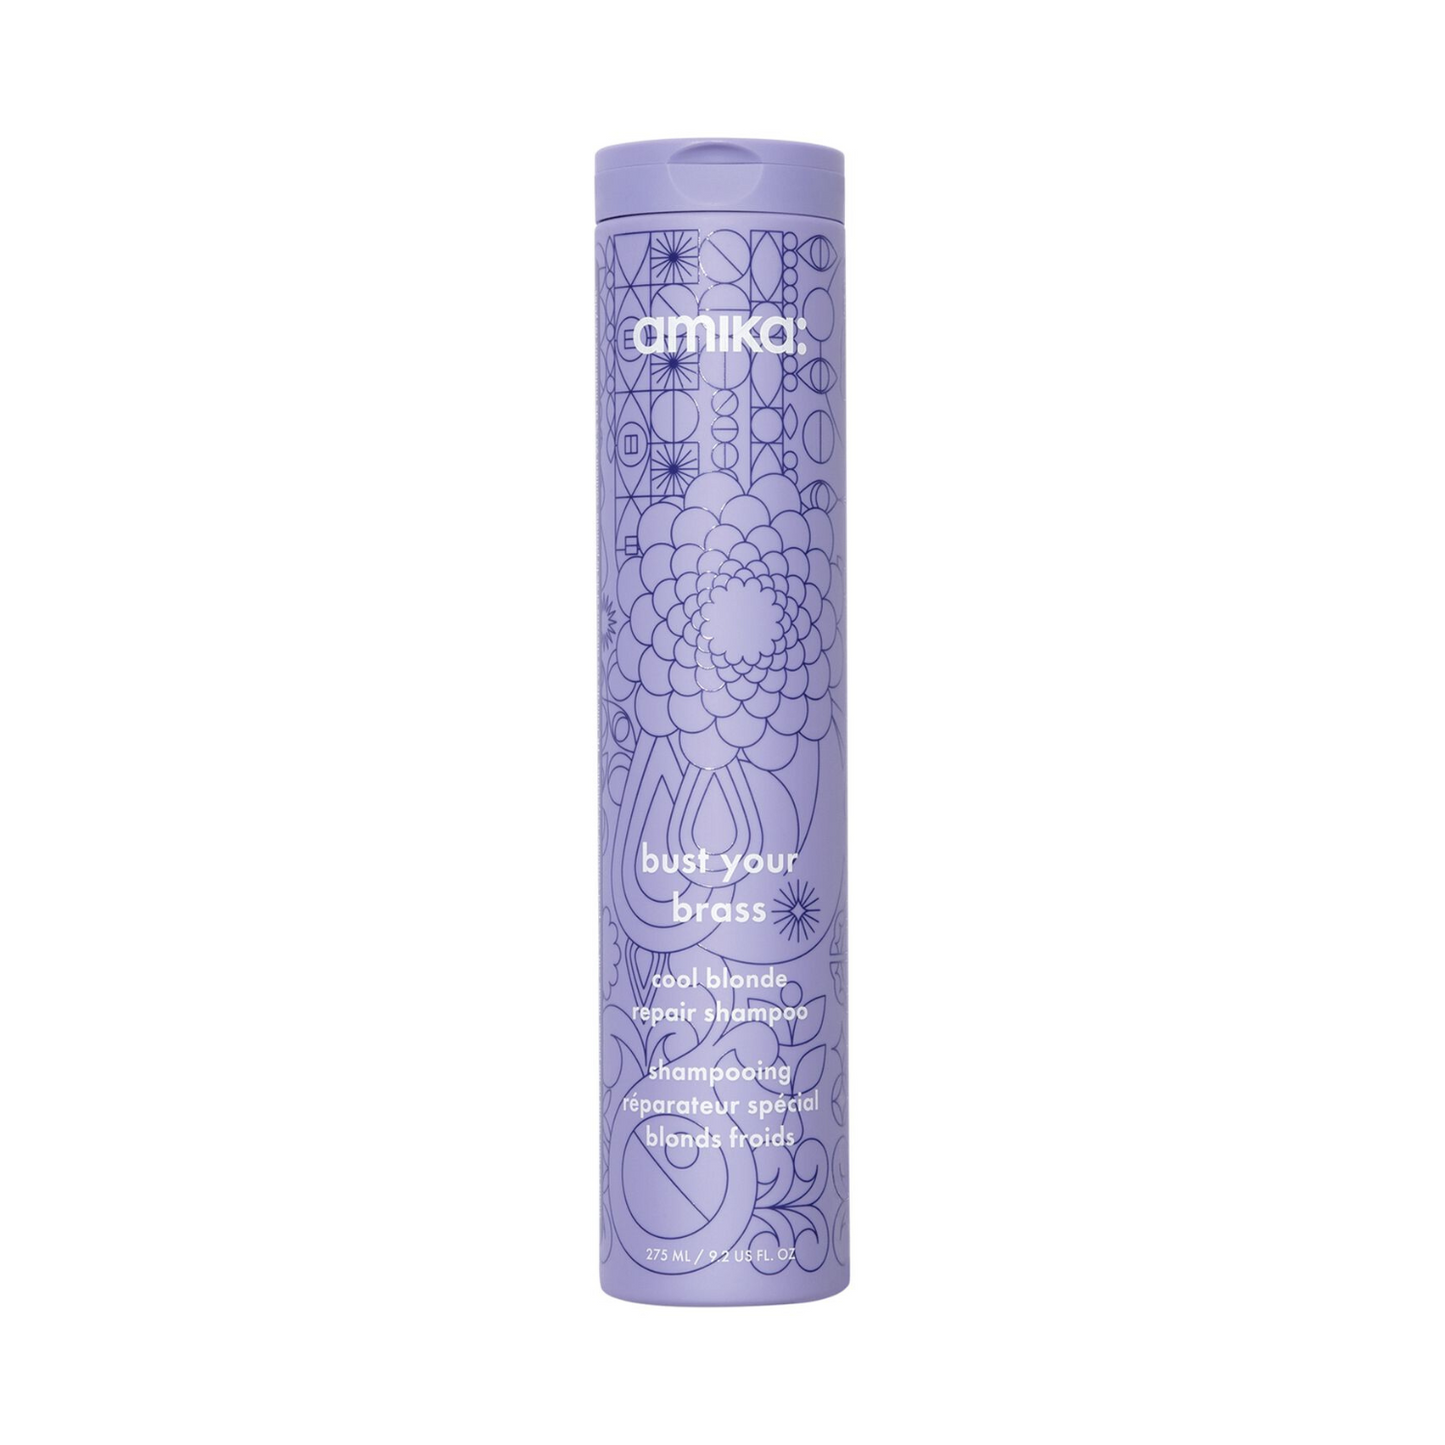 amika - Bust Your Brass Cool Blonde Repair Shampoo